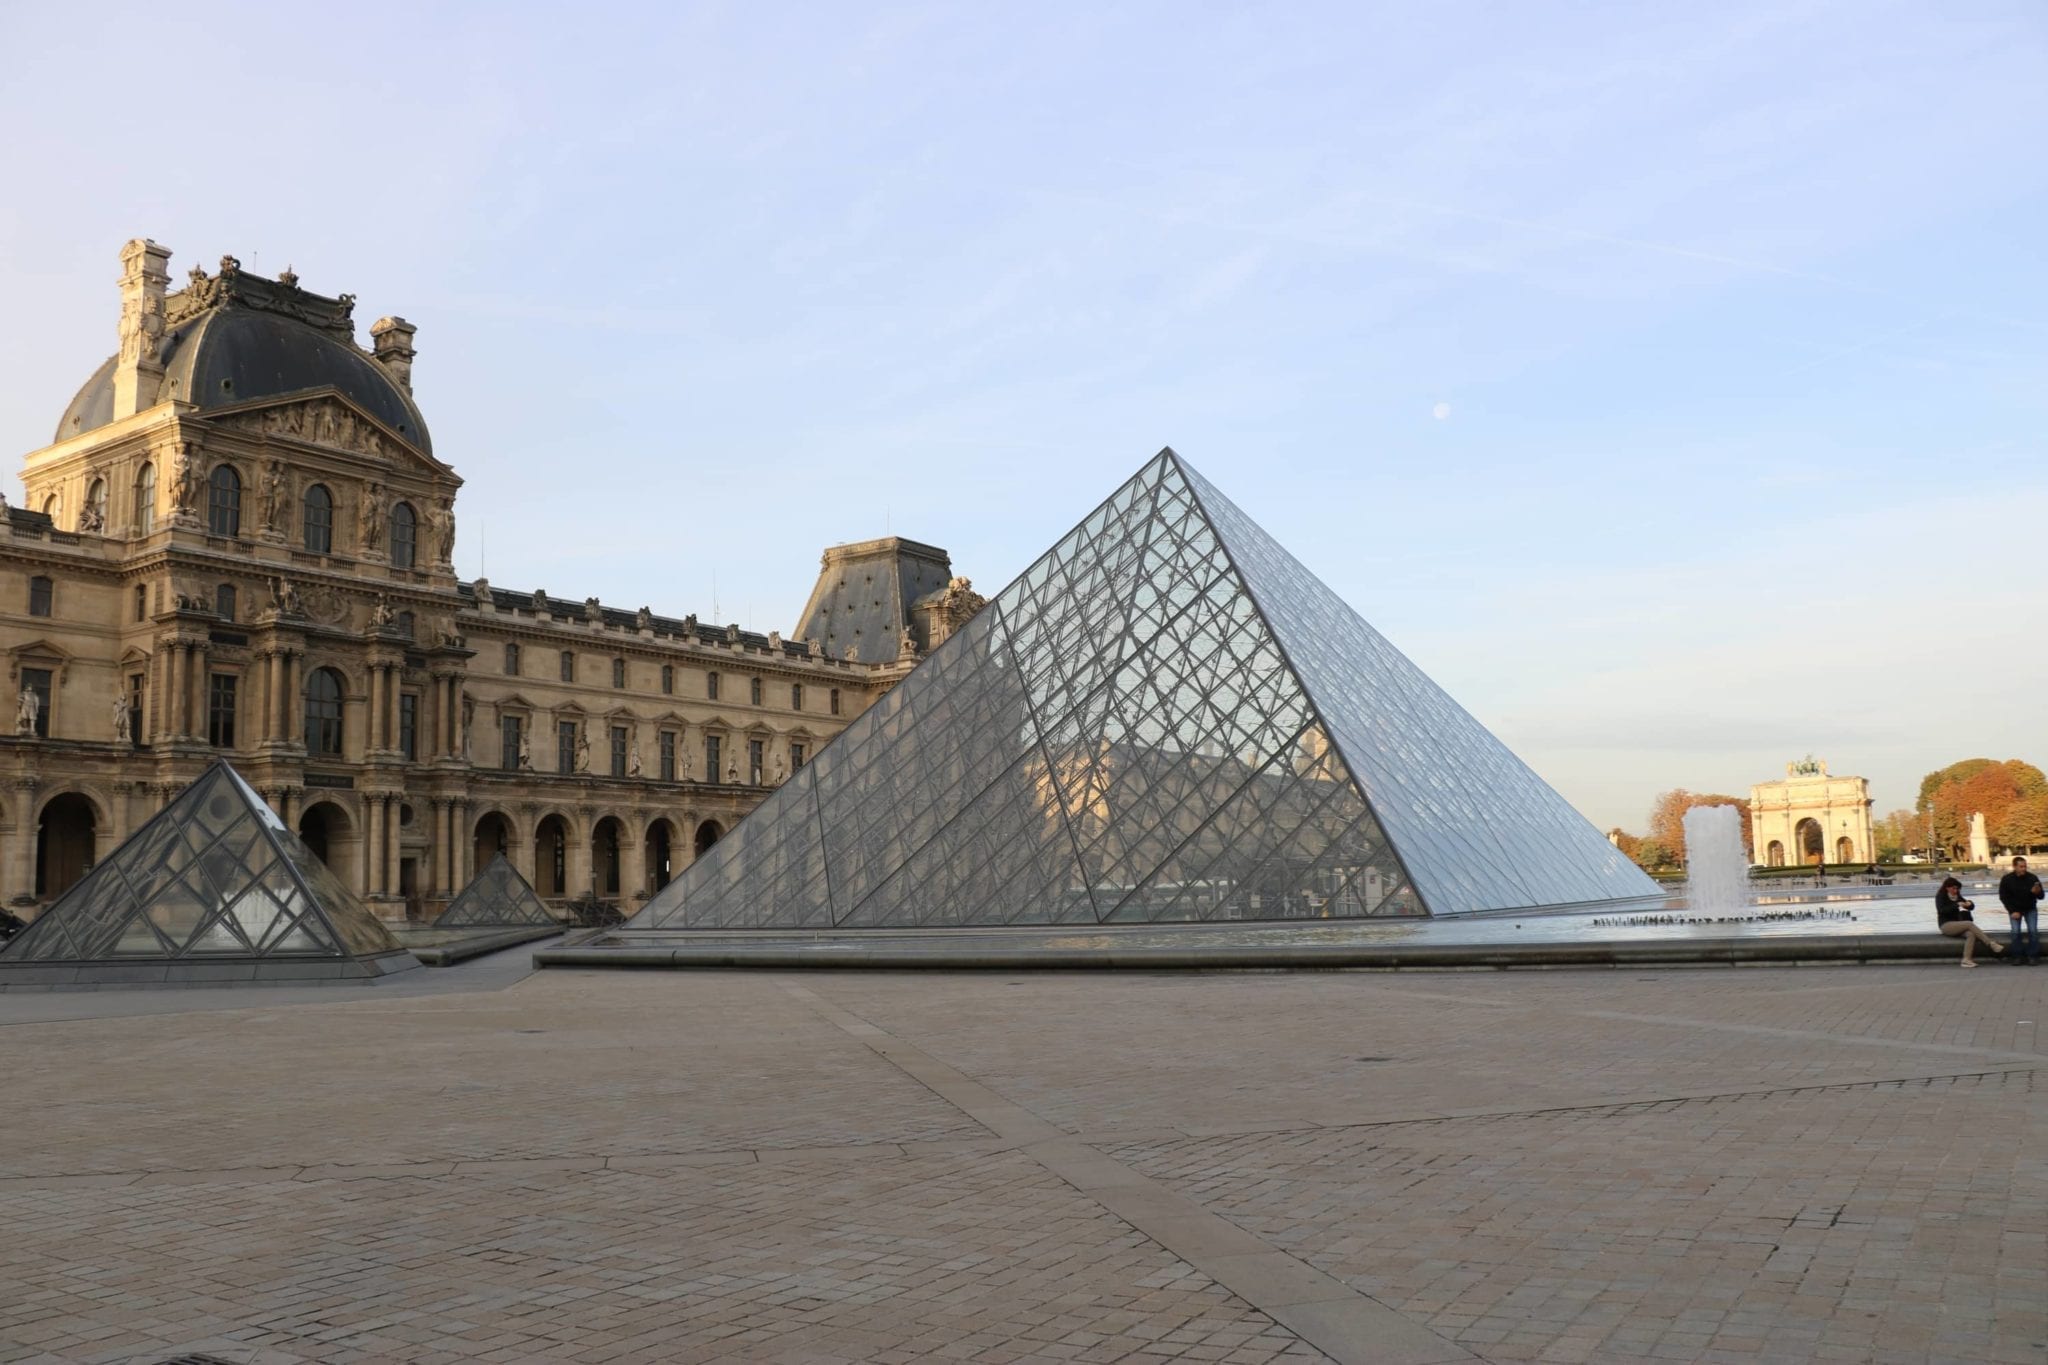 A large glass pyramid at the Louvre